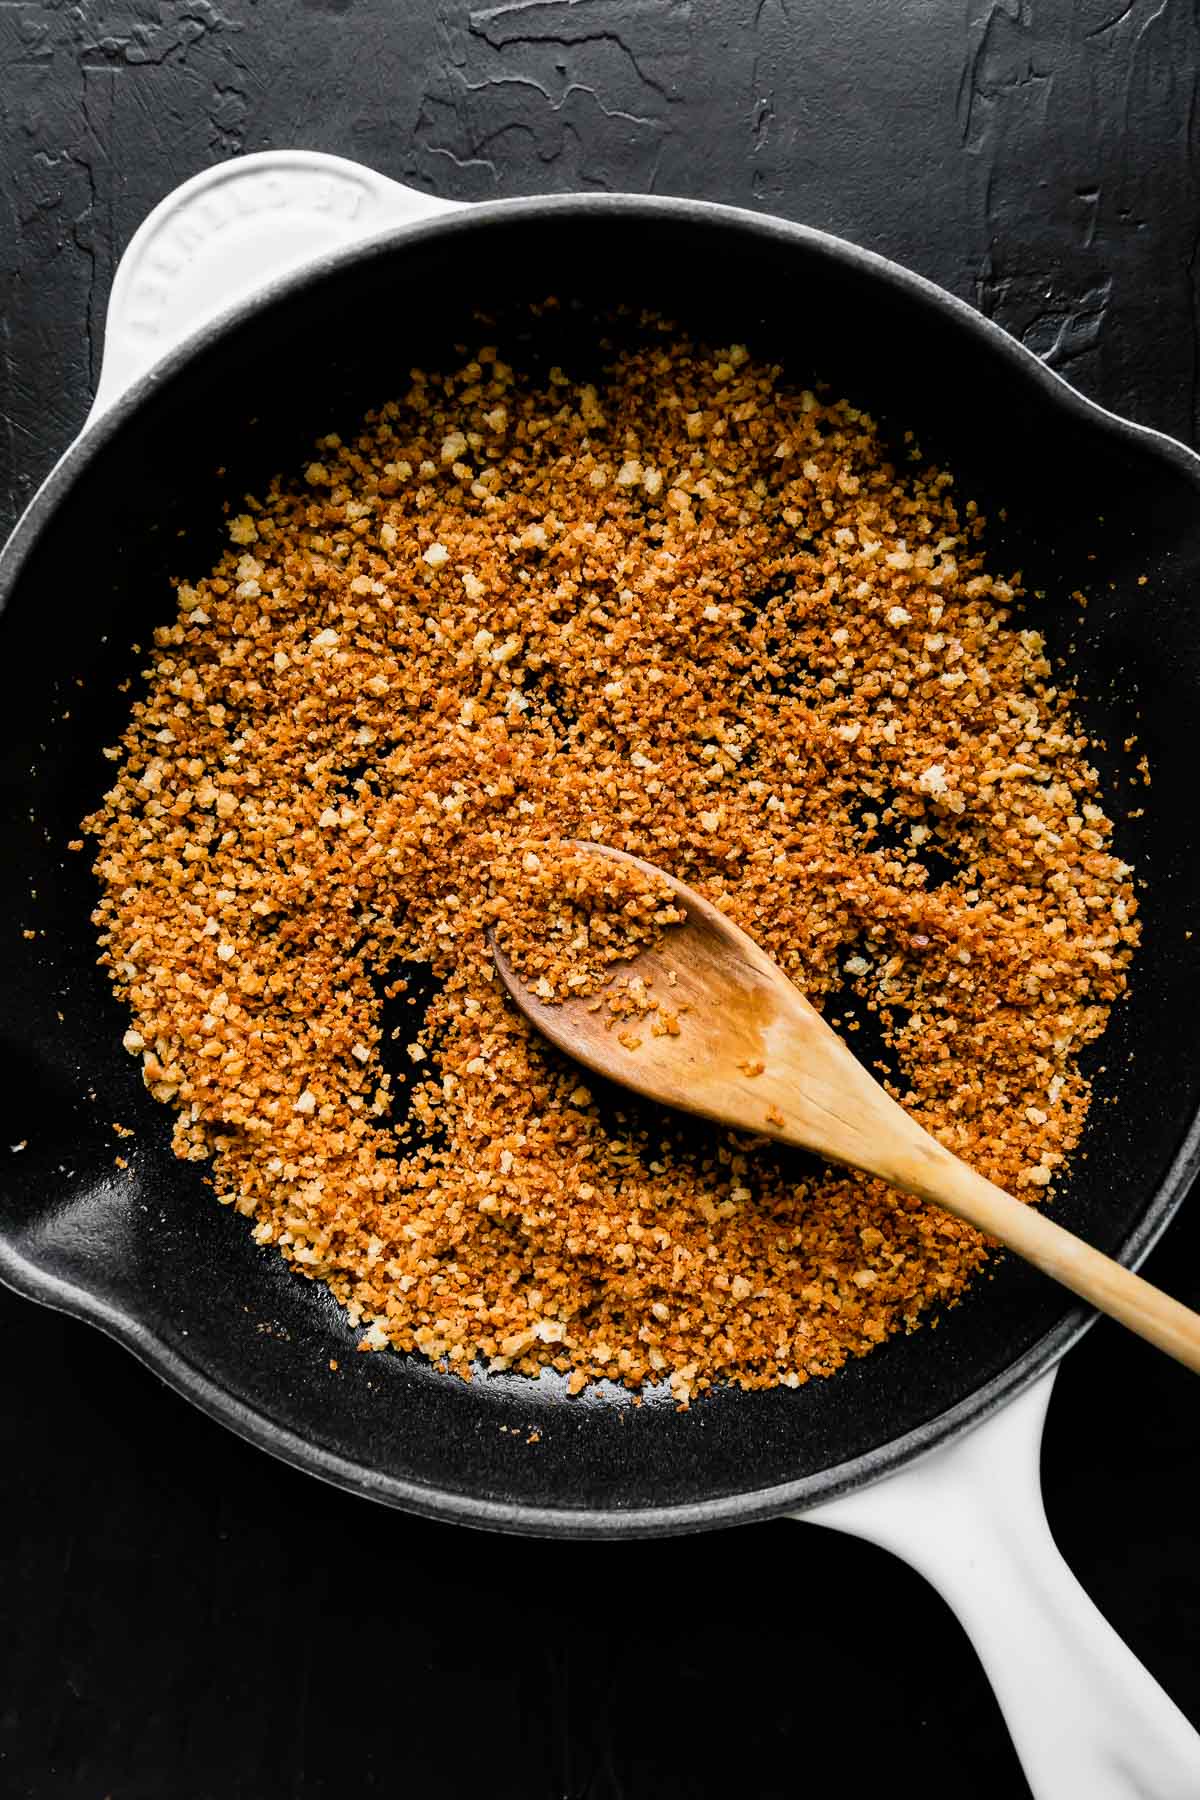 Toasted garlic breadcrumbs fills a small white Le Creuset cast iron pan that sits atop a black textured surface. A wooden spoon rests inside of the pan for stirring.